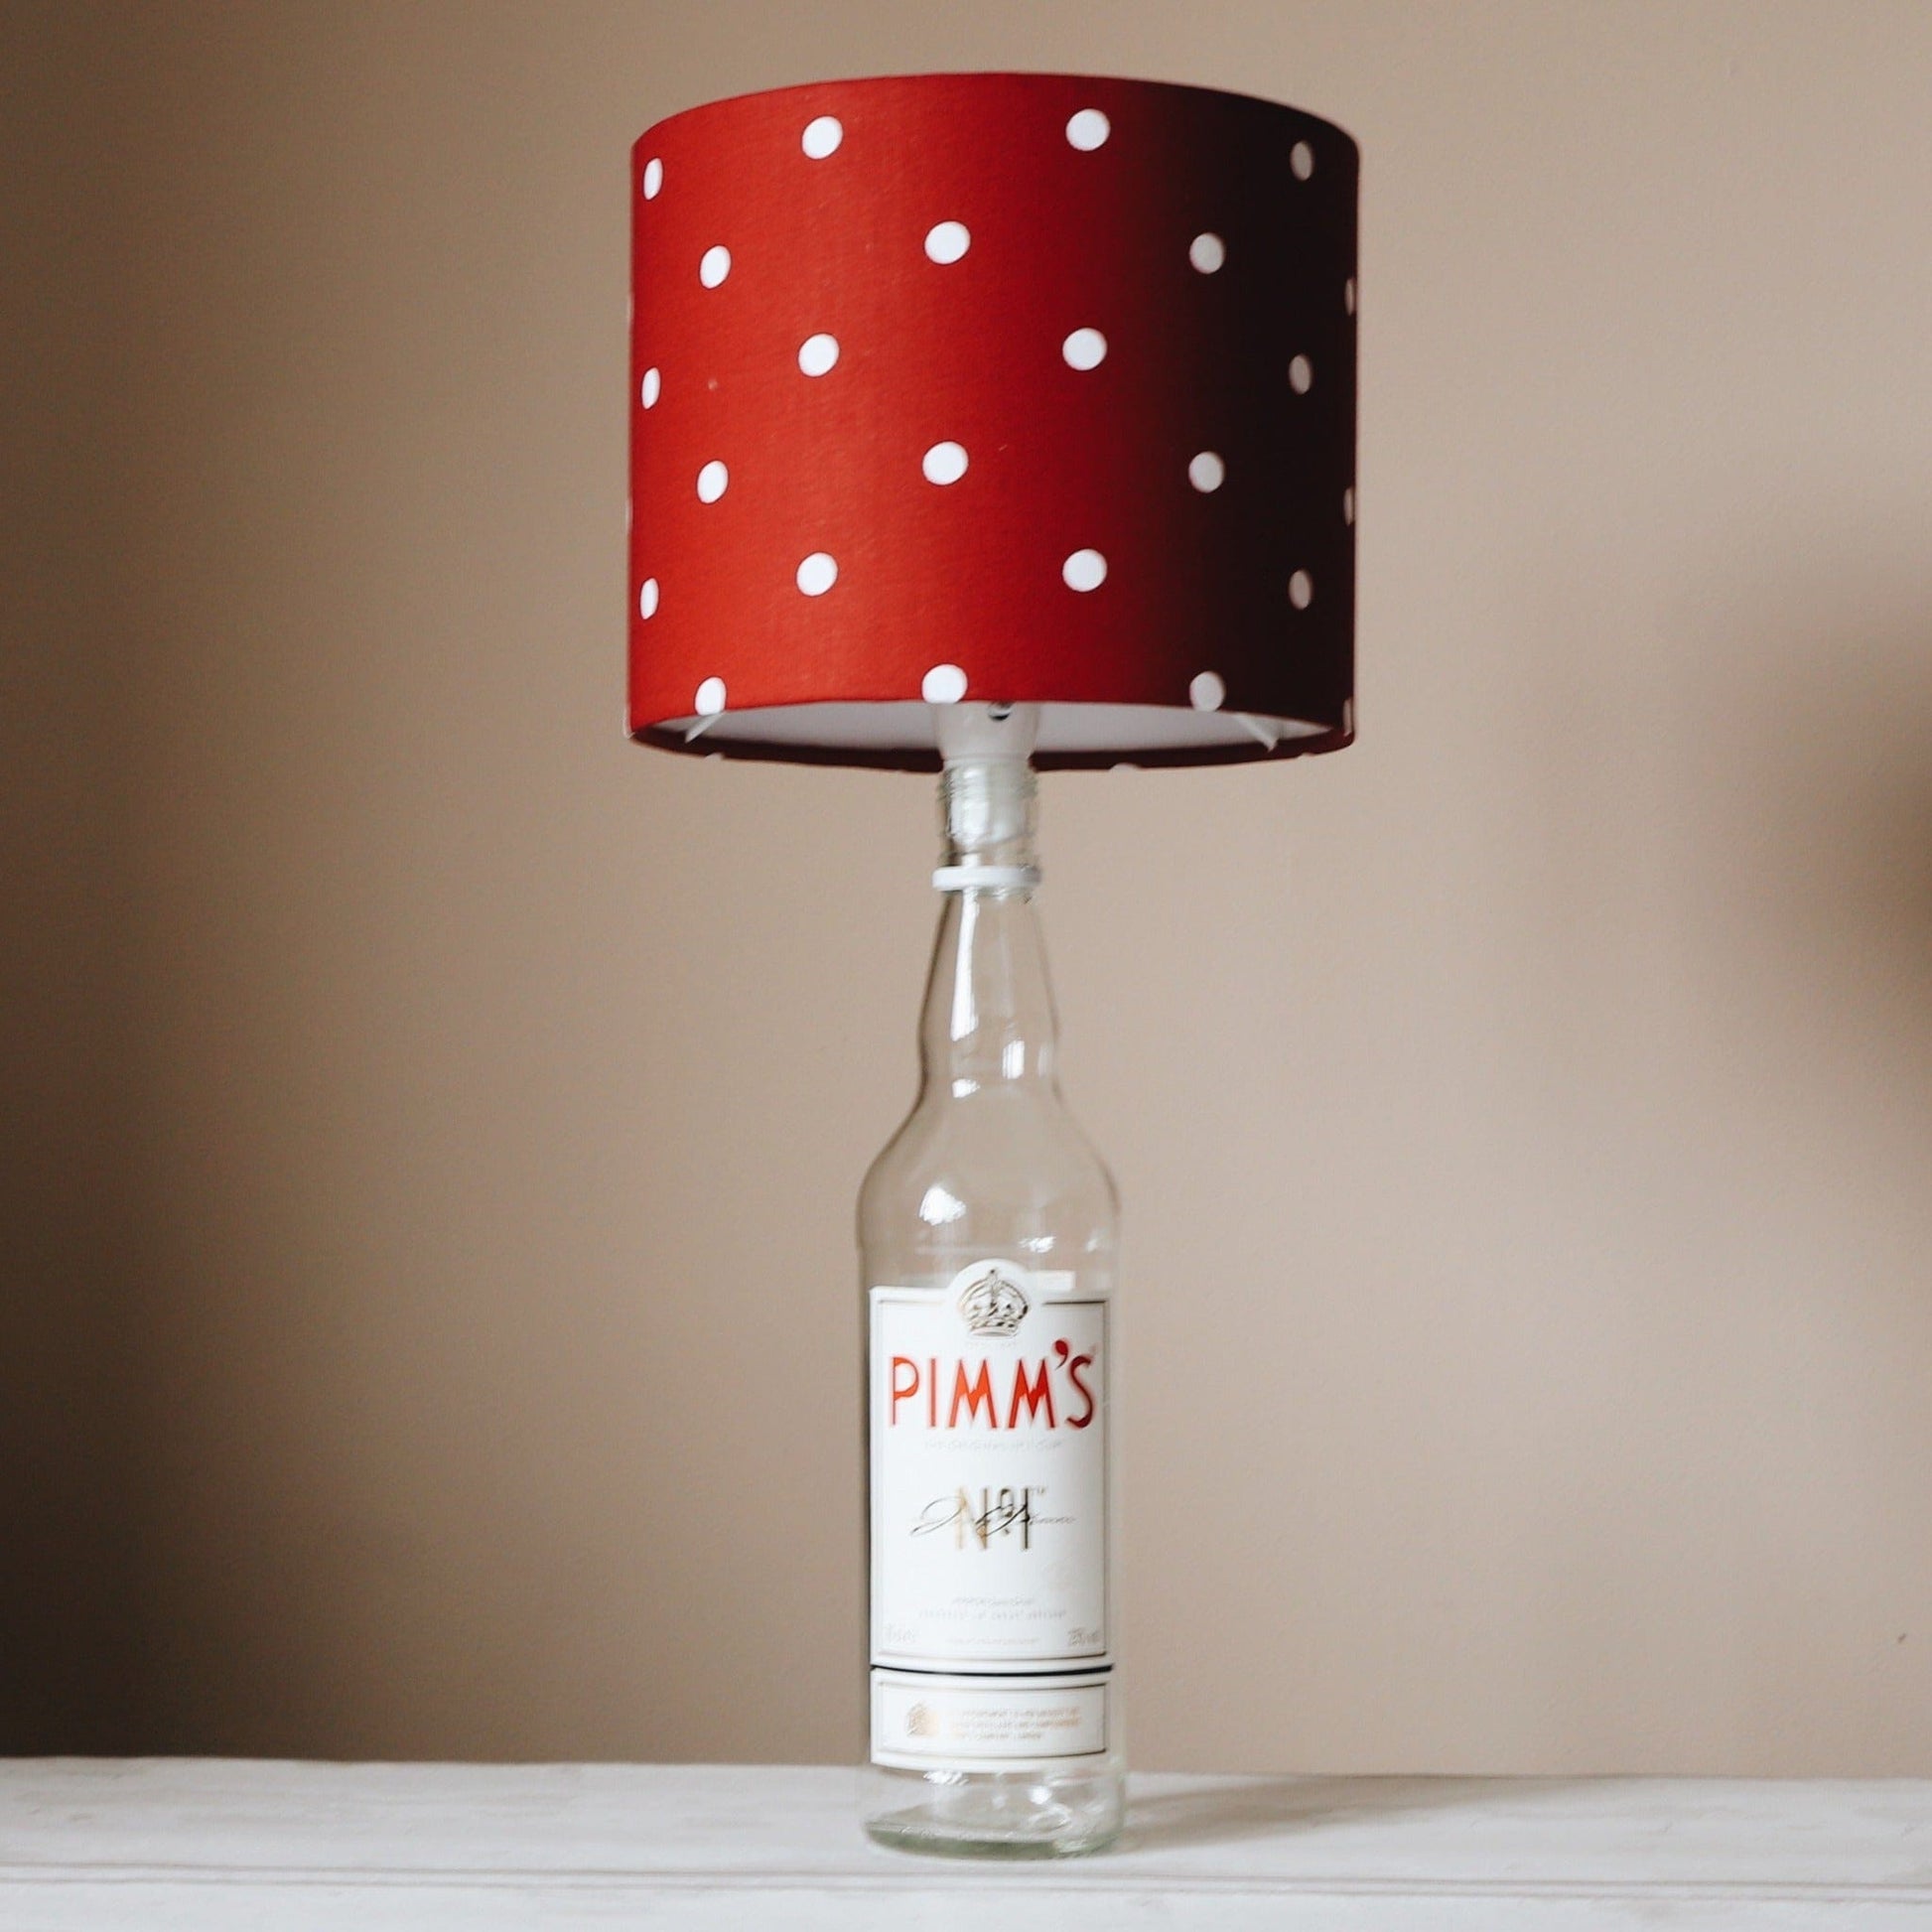 Ruby Jones Home Lampshades Pimms Bottle Lamp 16310